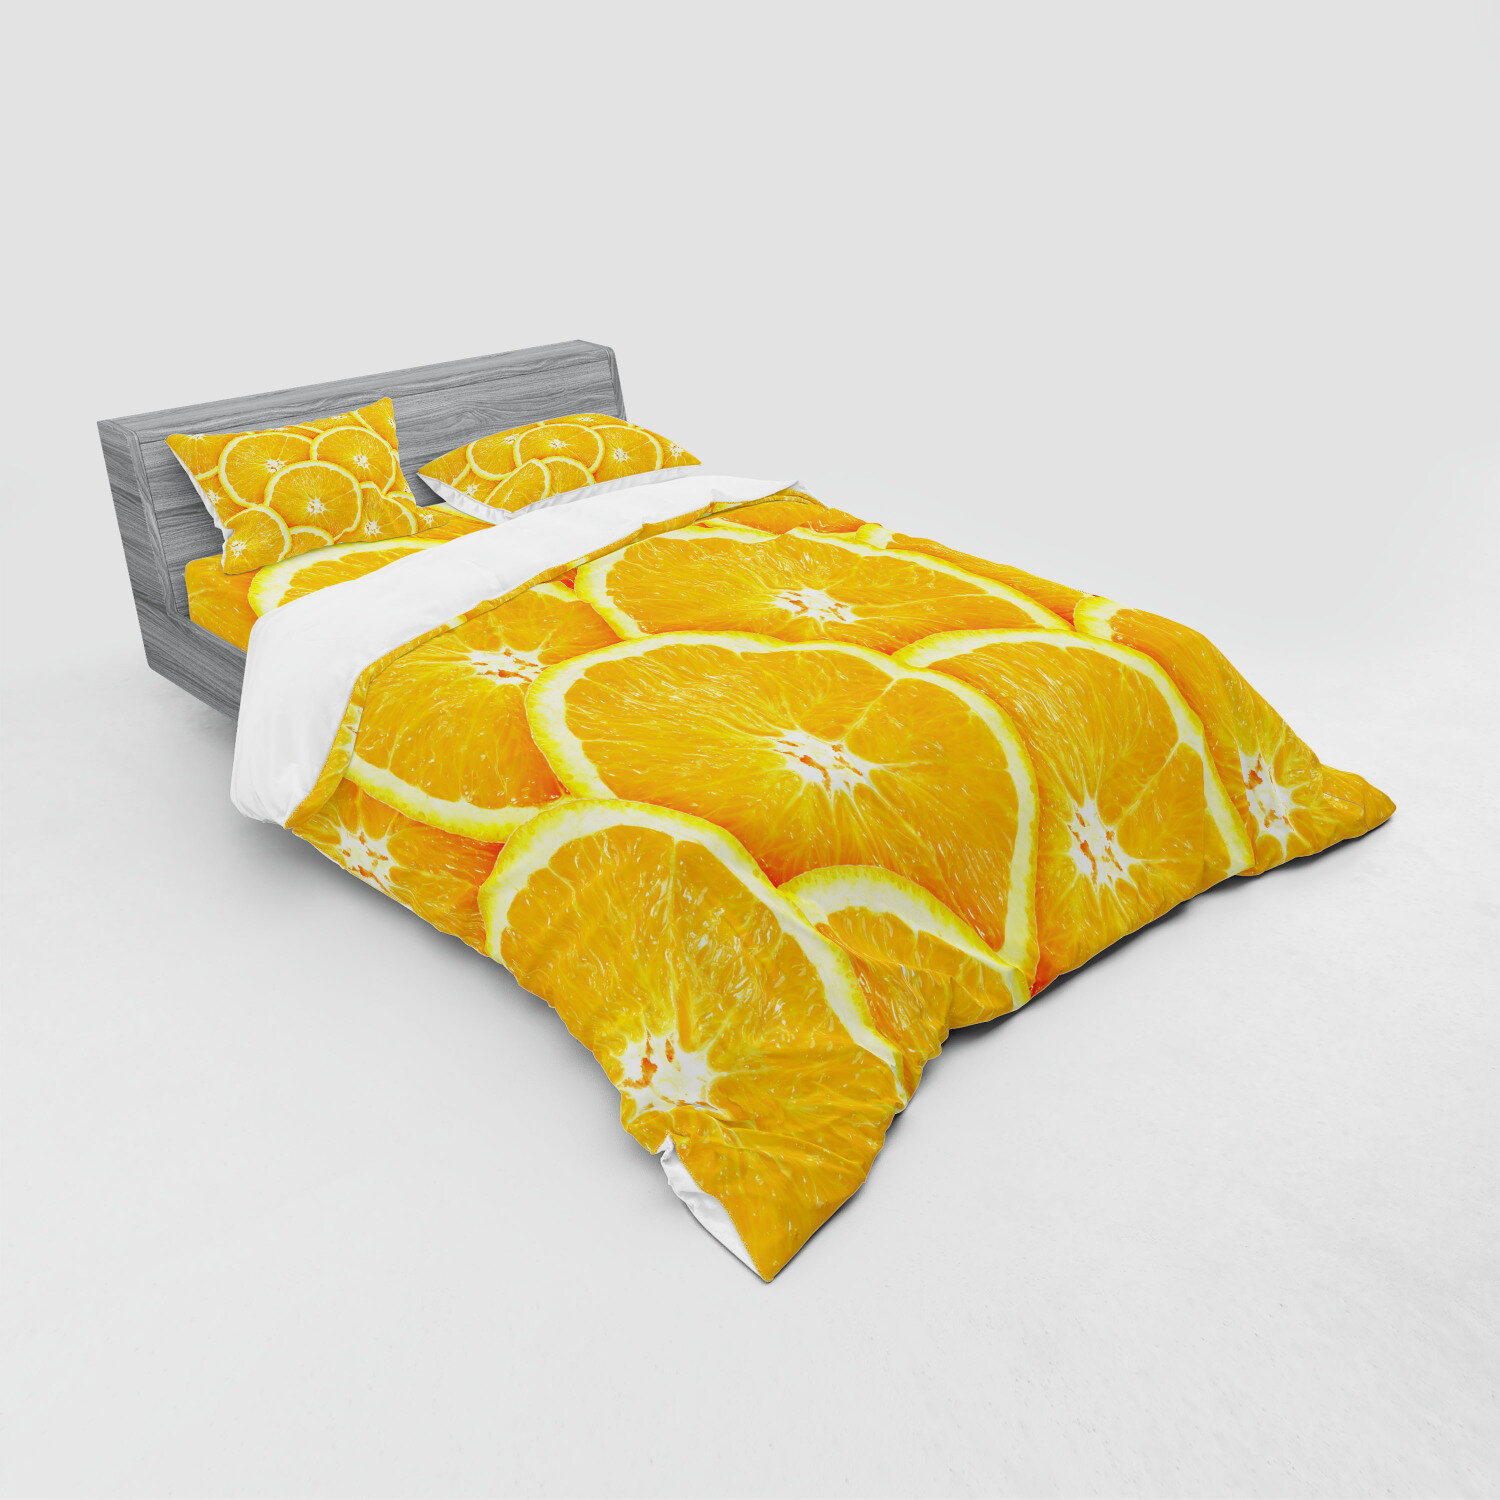 East Urban Home Realistic Citrus Fruit Of Slices Close Up